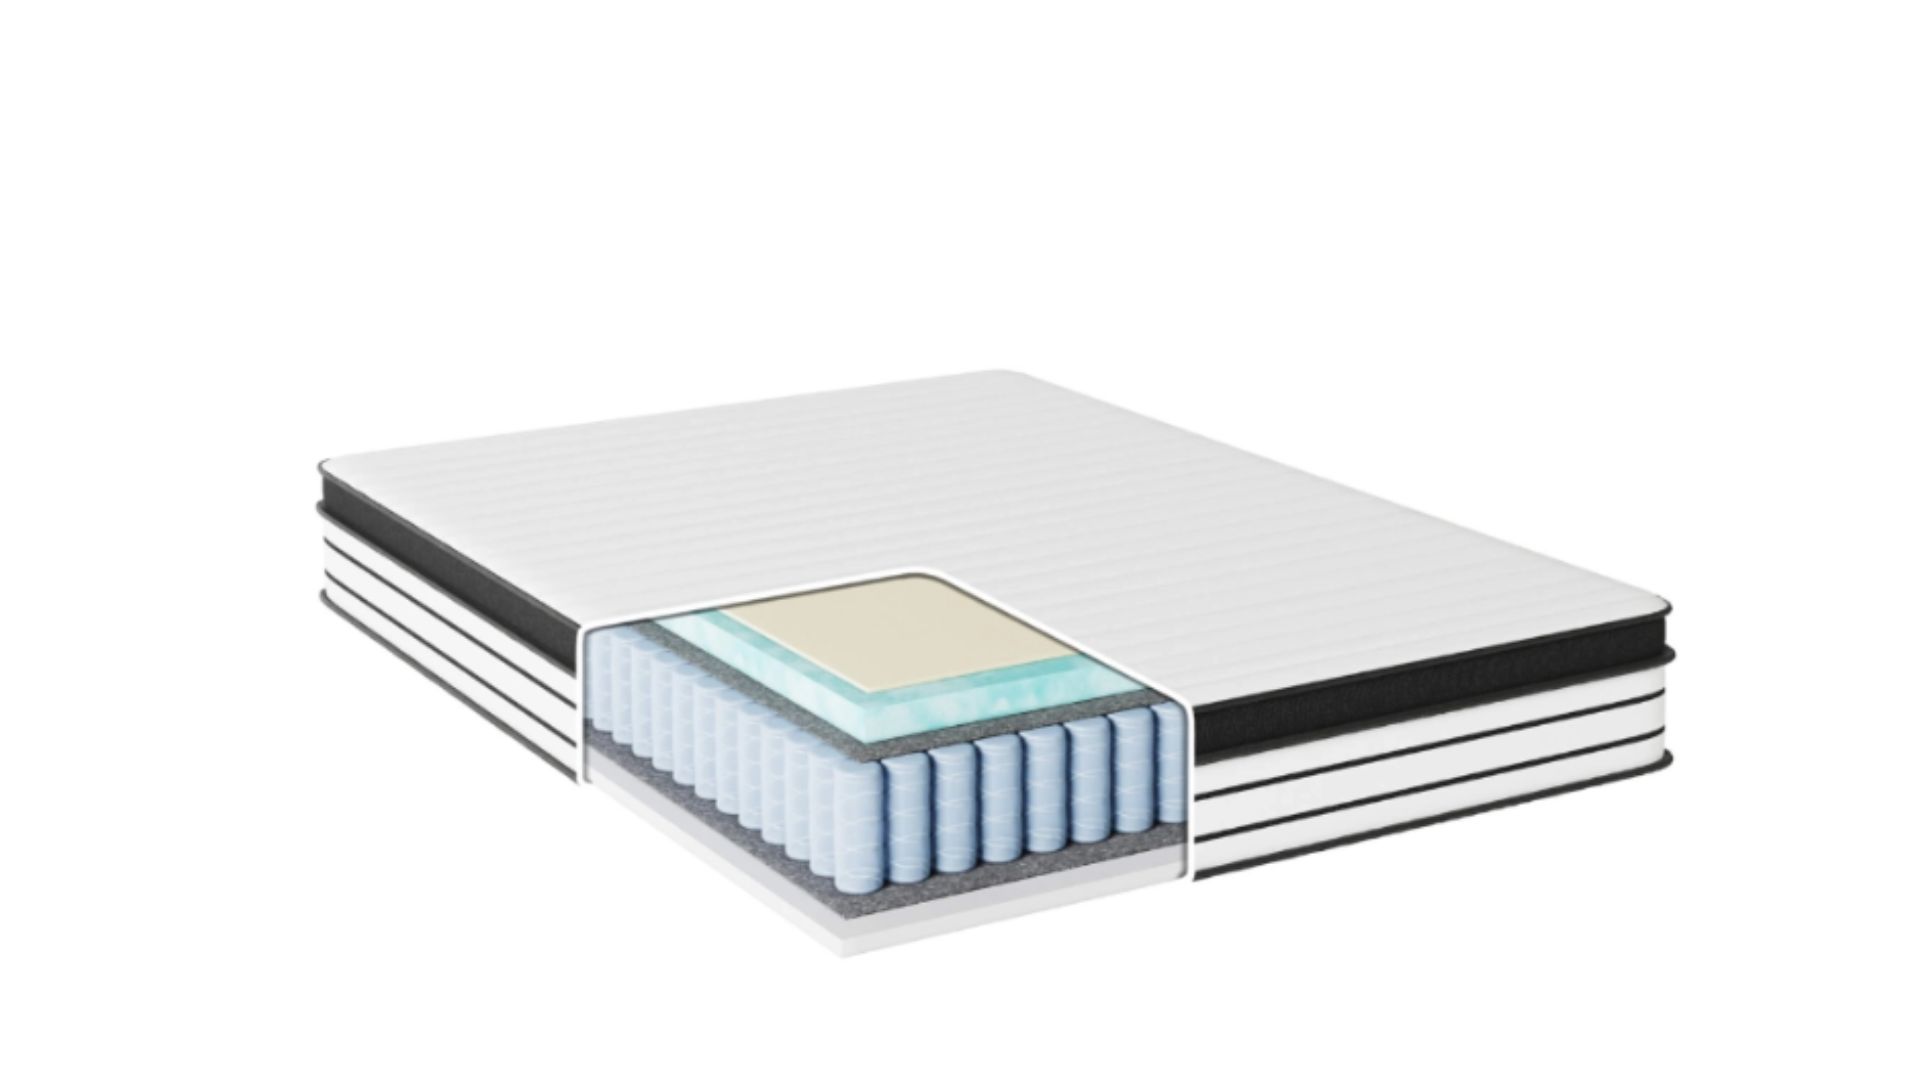 Silo Product Image For Mattress Cutout View